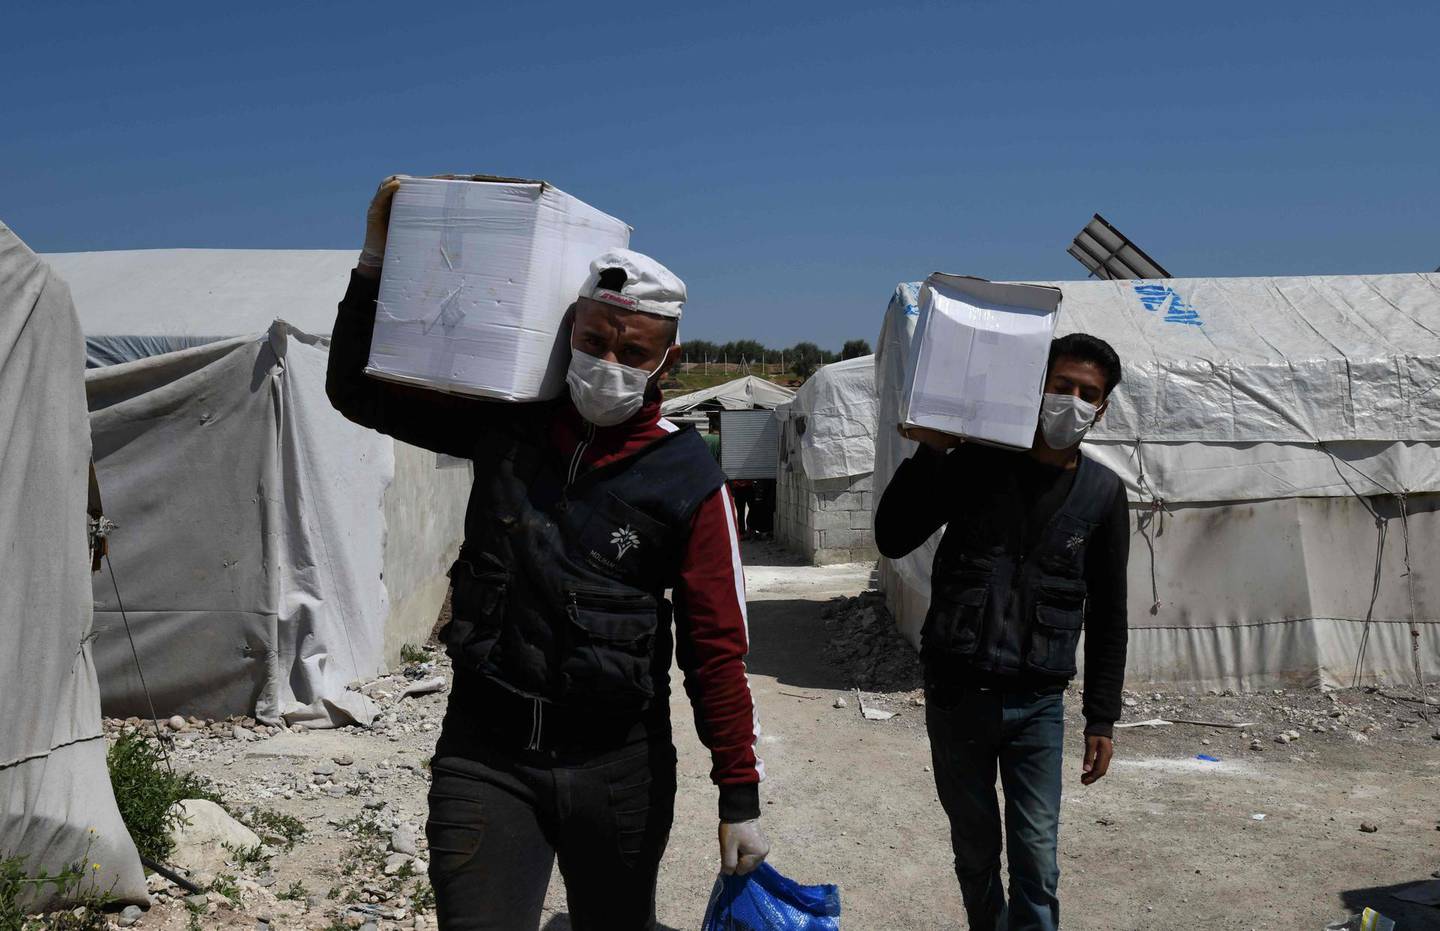 Volunteers deliver aid at a camp for displaced Syrians near the town of Deir al-Ballut, by the border with Turkey, in Syria's Afrin region in the northwest of the rebel-held side of the Aleppo province on April 14, 2020 during the coronavirus COVID-19 pandemic. / AFP / Rami al SAYED
